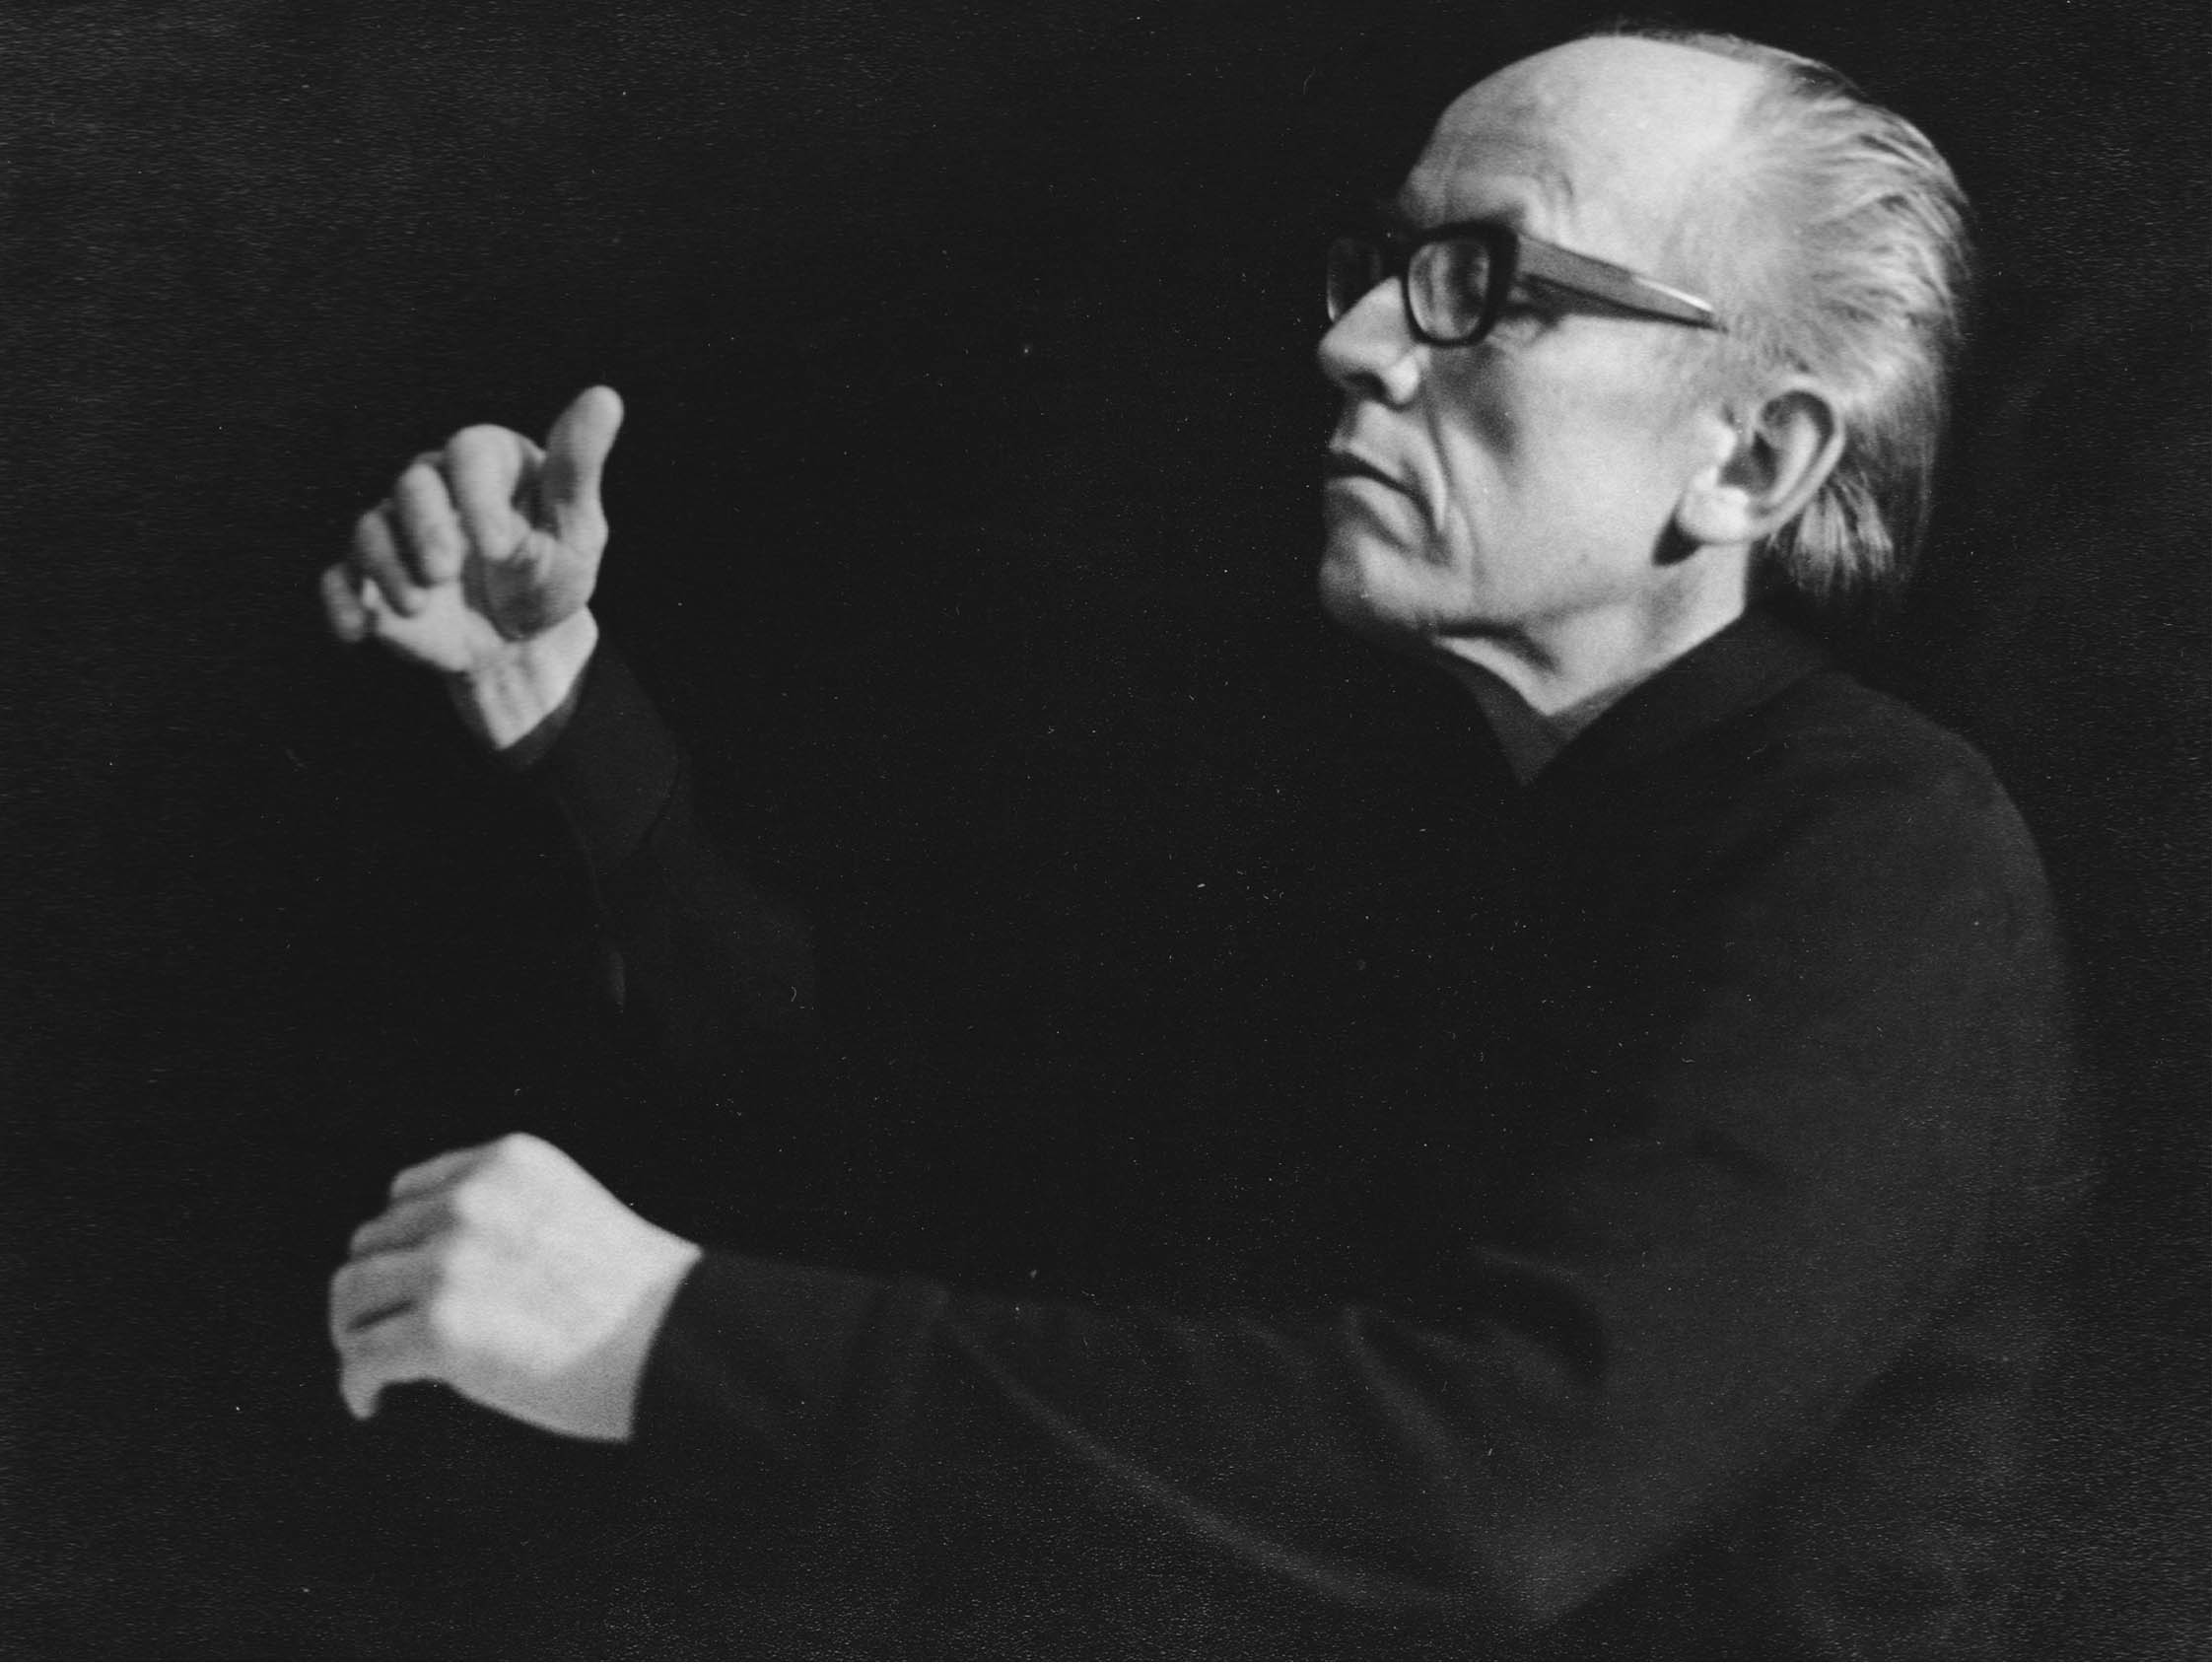 Black and white photo of Knut Nystedt conducting.